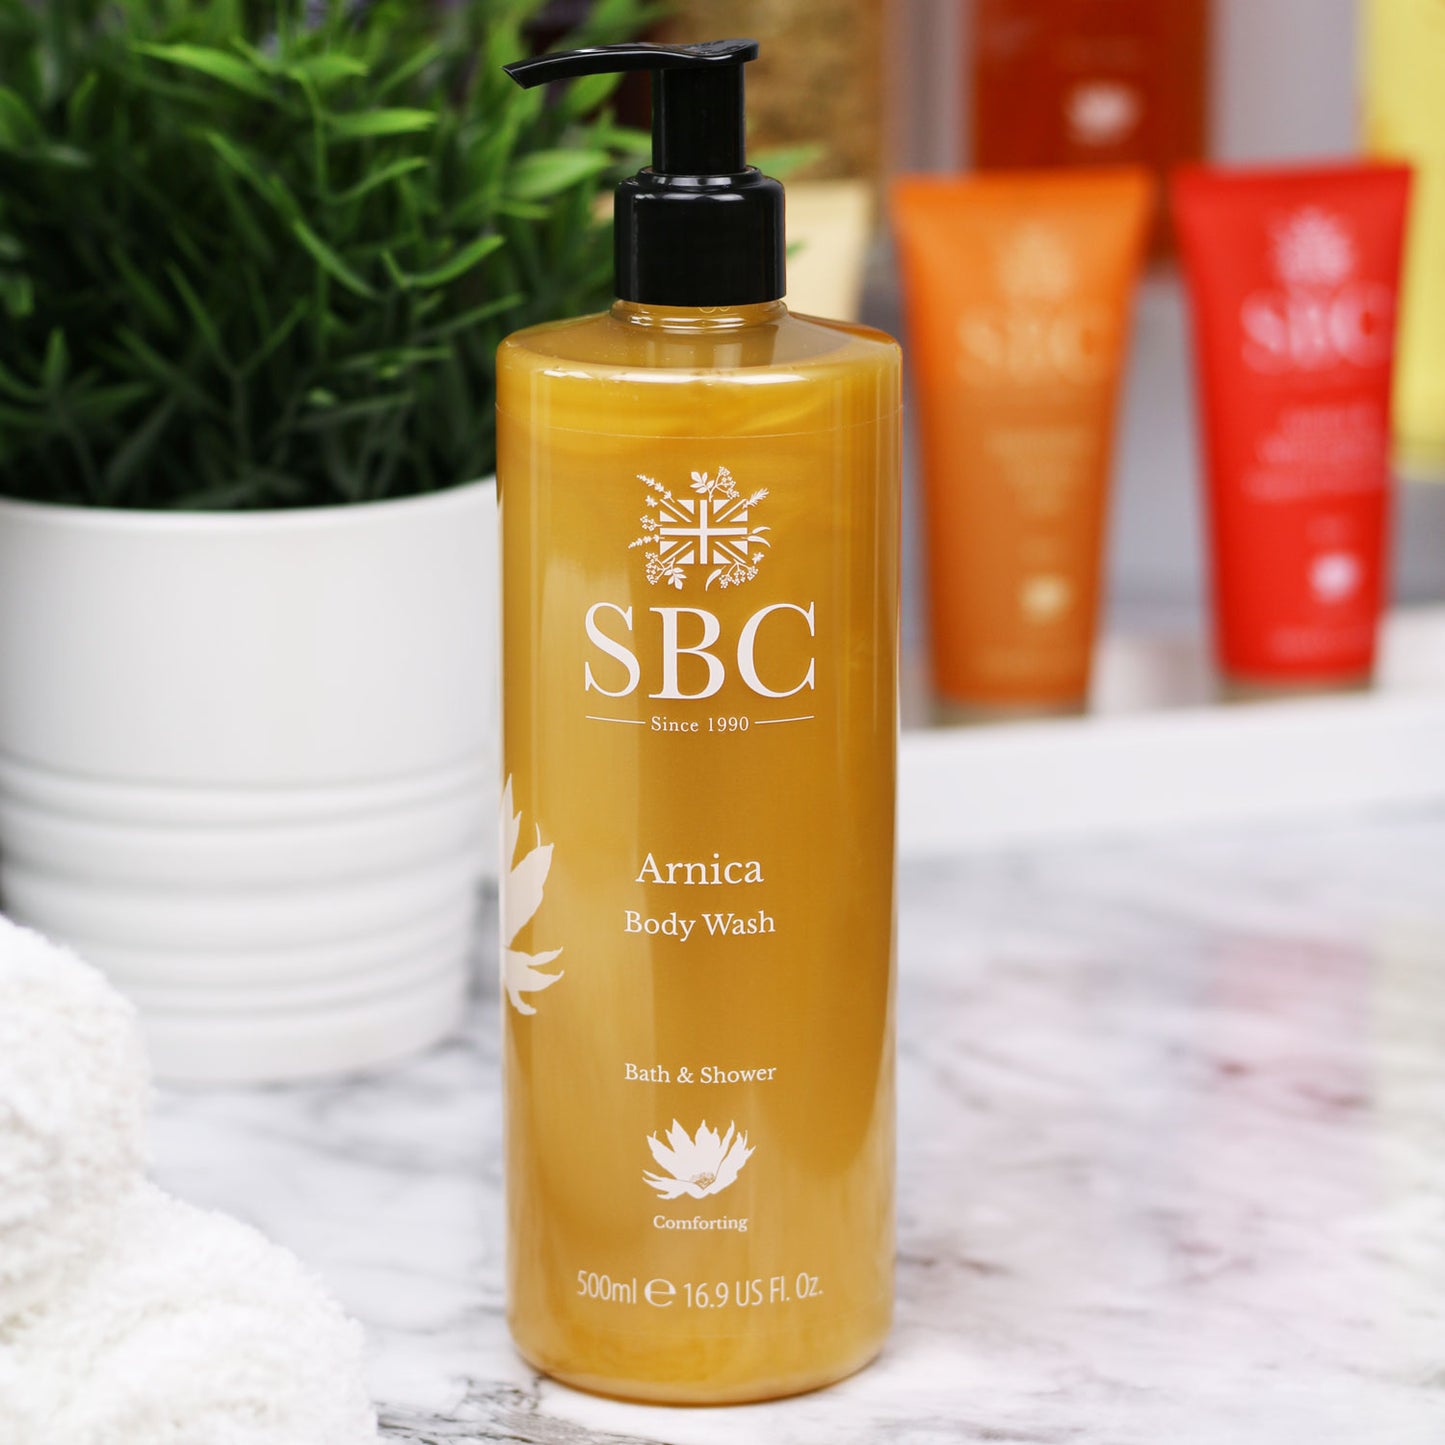 Anica Body Wash with Arnica products